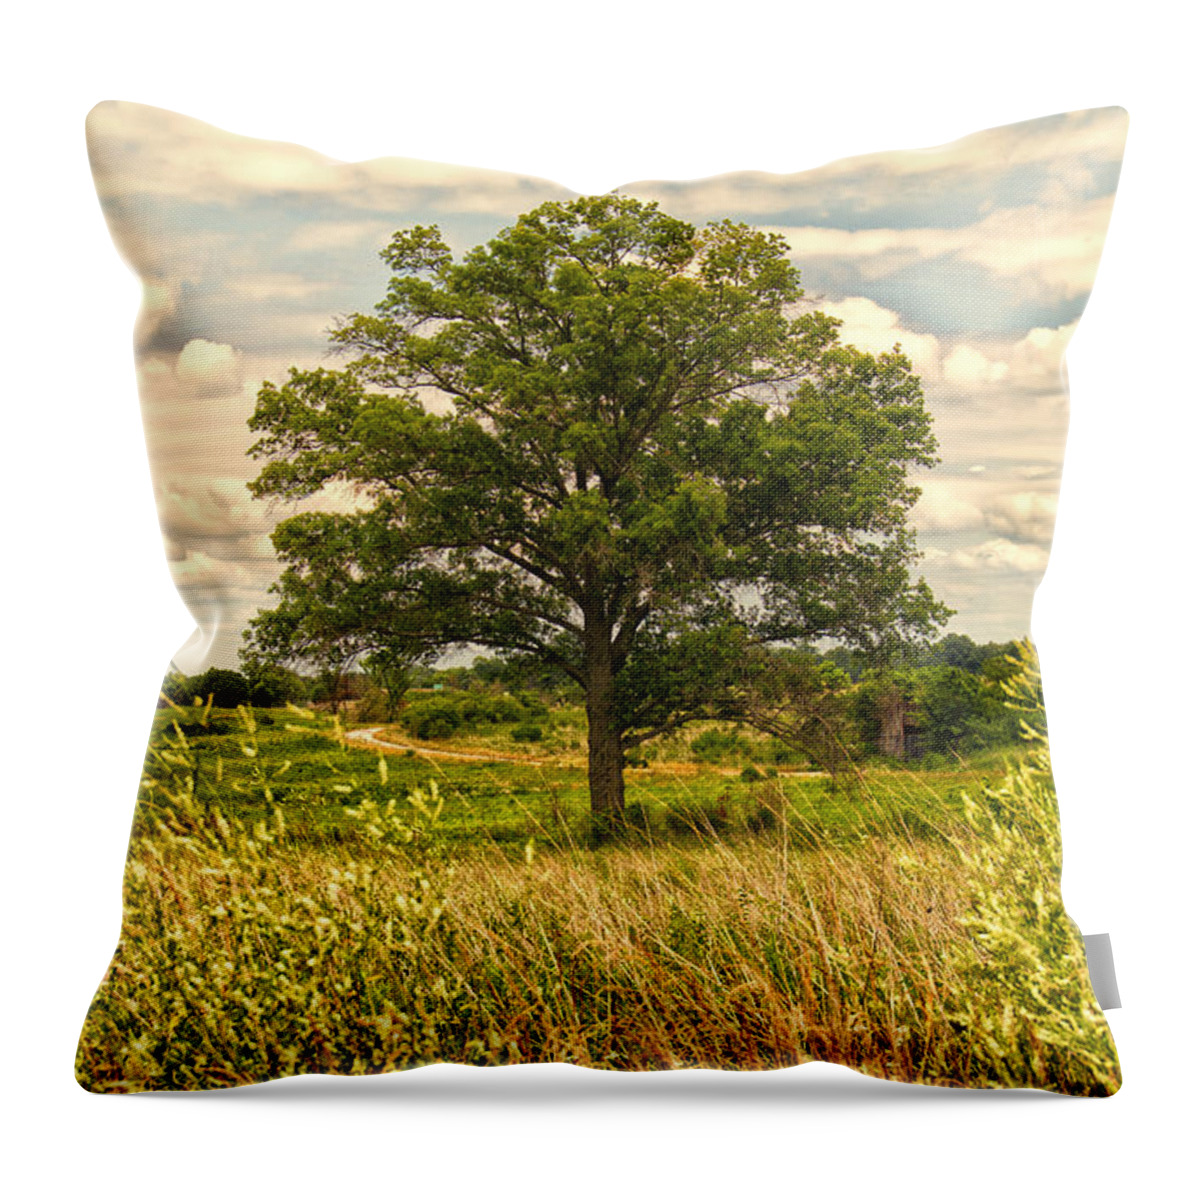 Tree Throw Pillow featuring the photograph Serenity by Linda Tiepelman